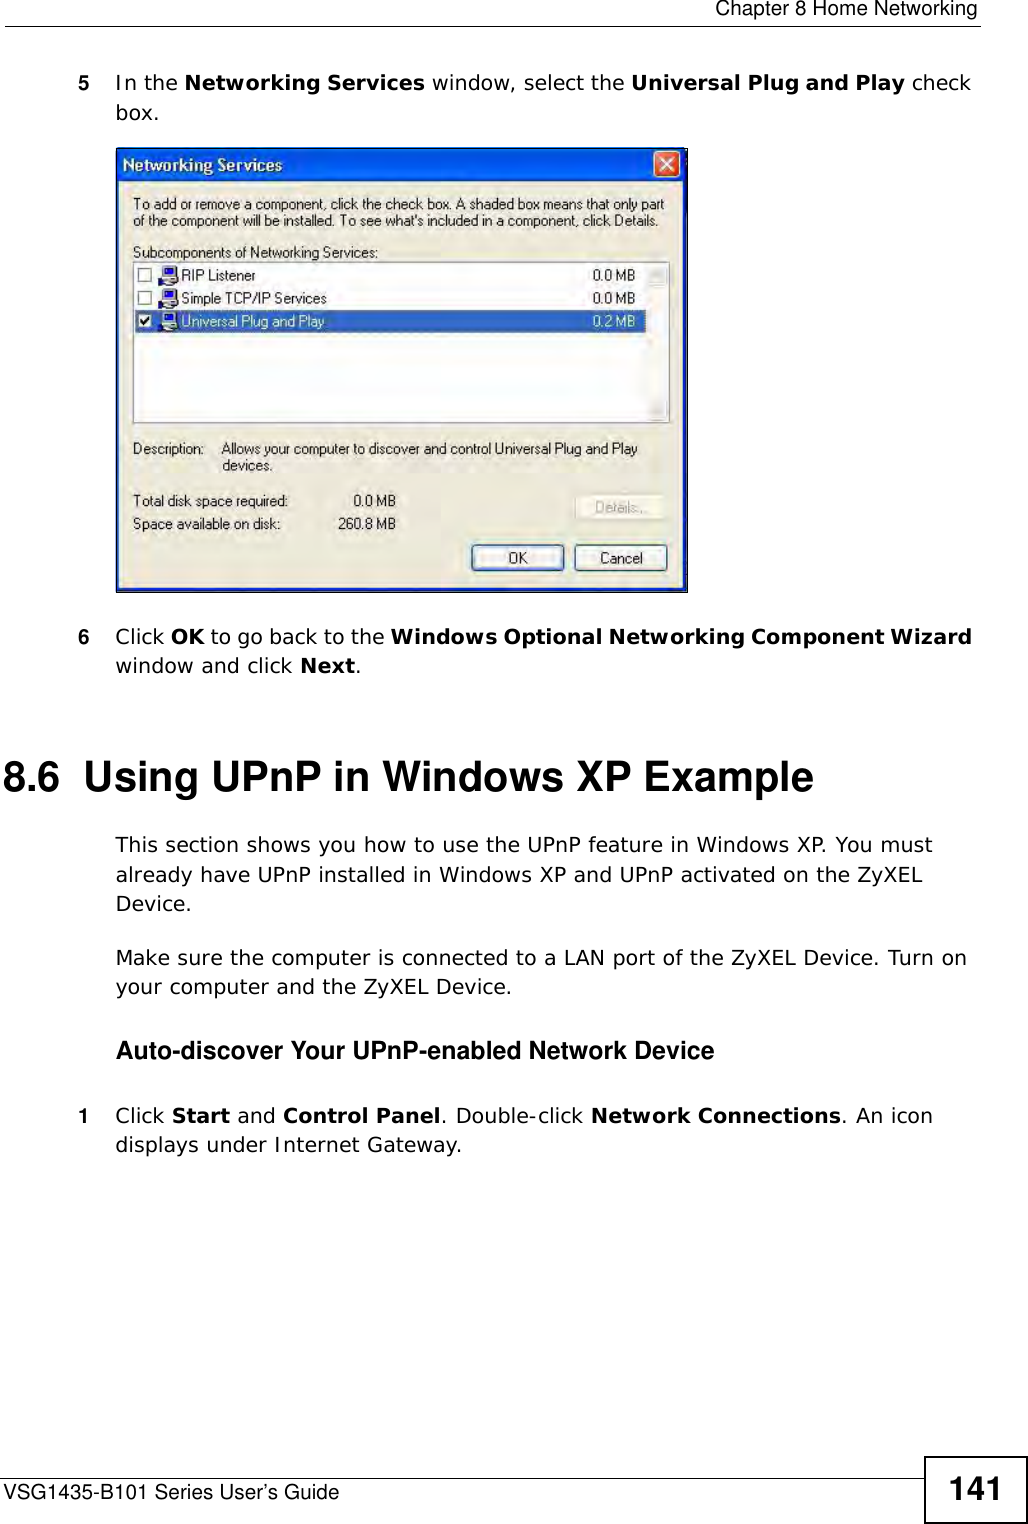  Chapter 8 Home NetworkingVSG1435-B101 Series User’s Guide 1415In the Networking Services window, select the Universal Plug and Play check box. Networking Services6Click OK to go back to the Windows Optional Networking Component Wizard window and click Next. 8.6  Using UPnP in Windows XP ExampleThis section shows you how to use the UPnP feature in Windows XP. You must already have UPnP installed in Windows XP and UPnP activated on the ZyXEL Device.Make sure the computer is connected to a LAN port of the ZyXEL Device. Turn on your computer and the ZyXEL Device. Auto-discover Your UPnP-enabled Network Device1Click Start and Control Panel. Double-click Network Connections. An icon displays under Internet Gateway.